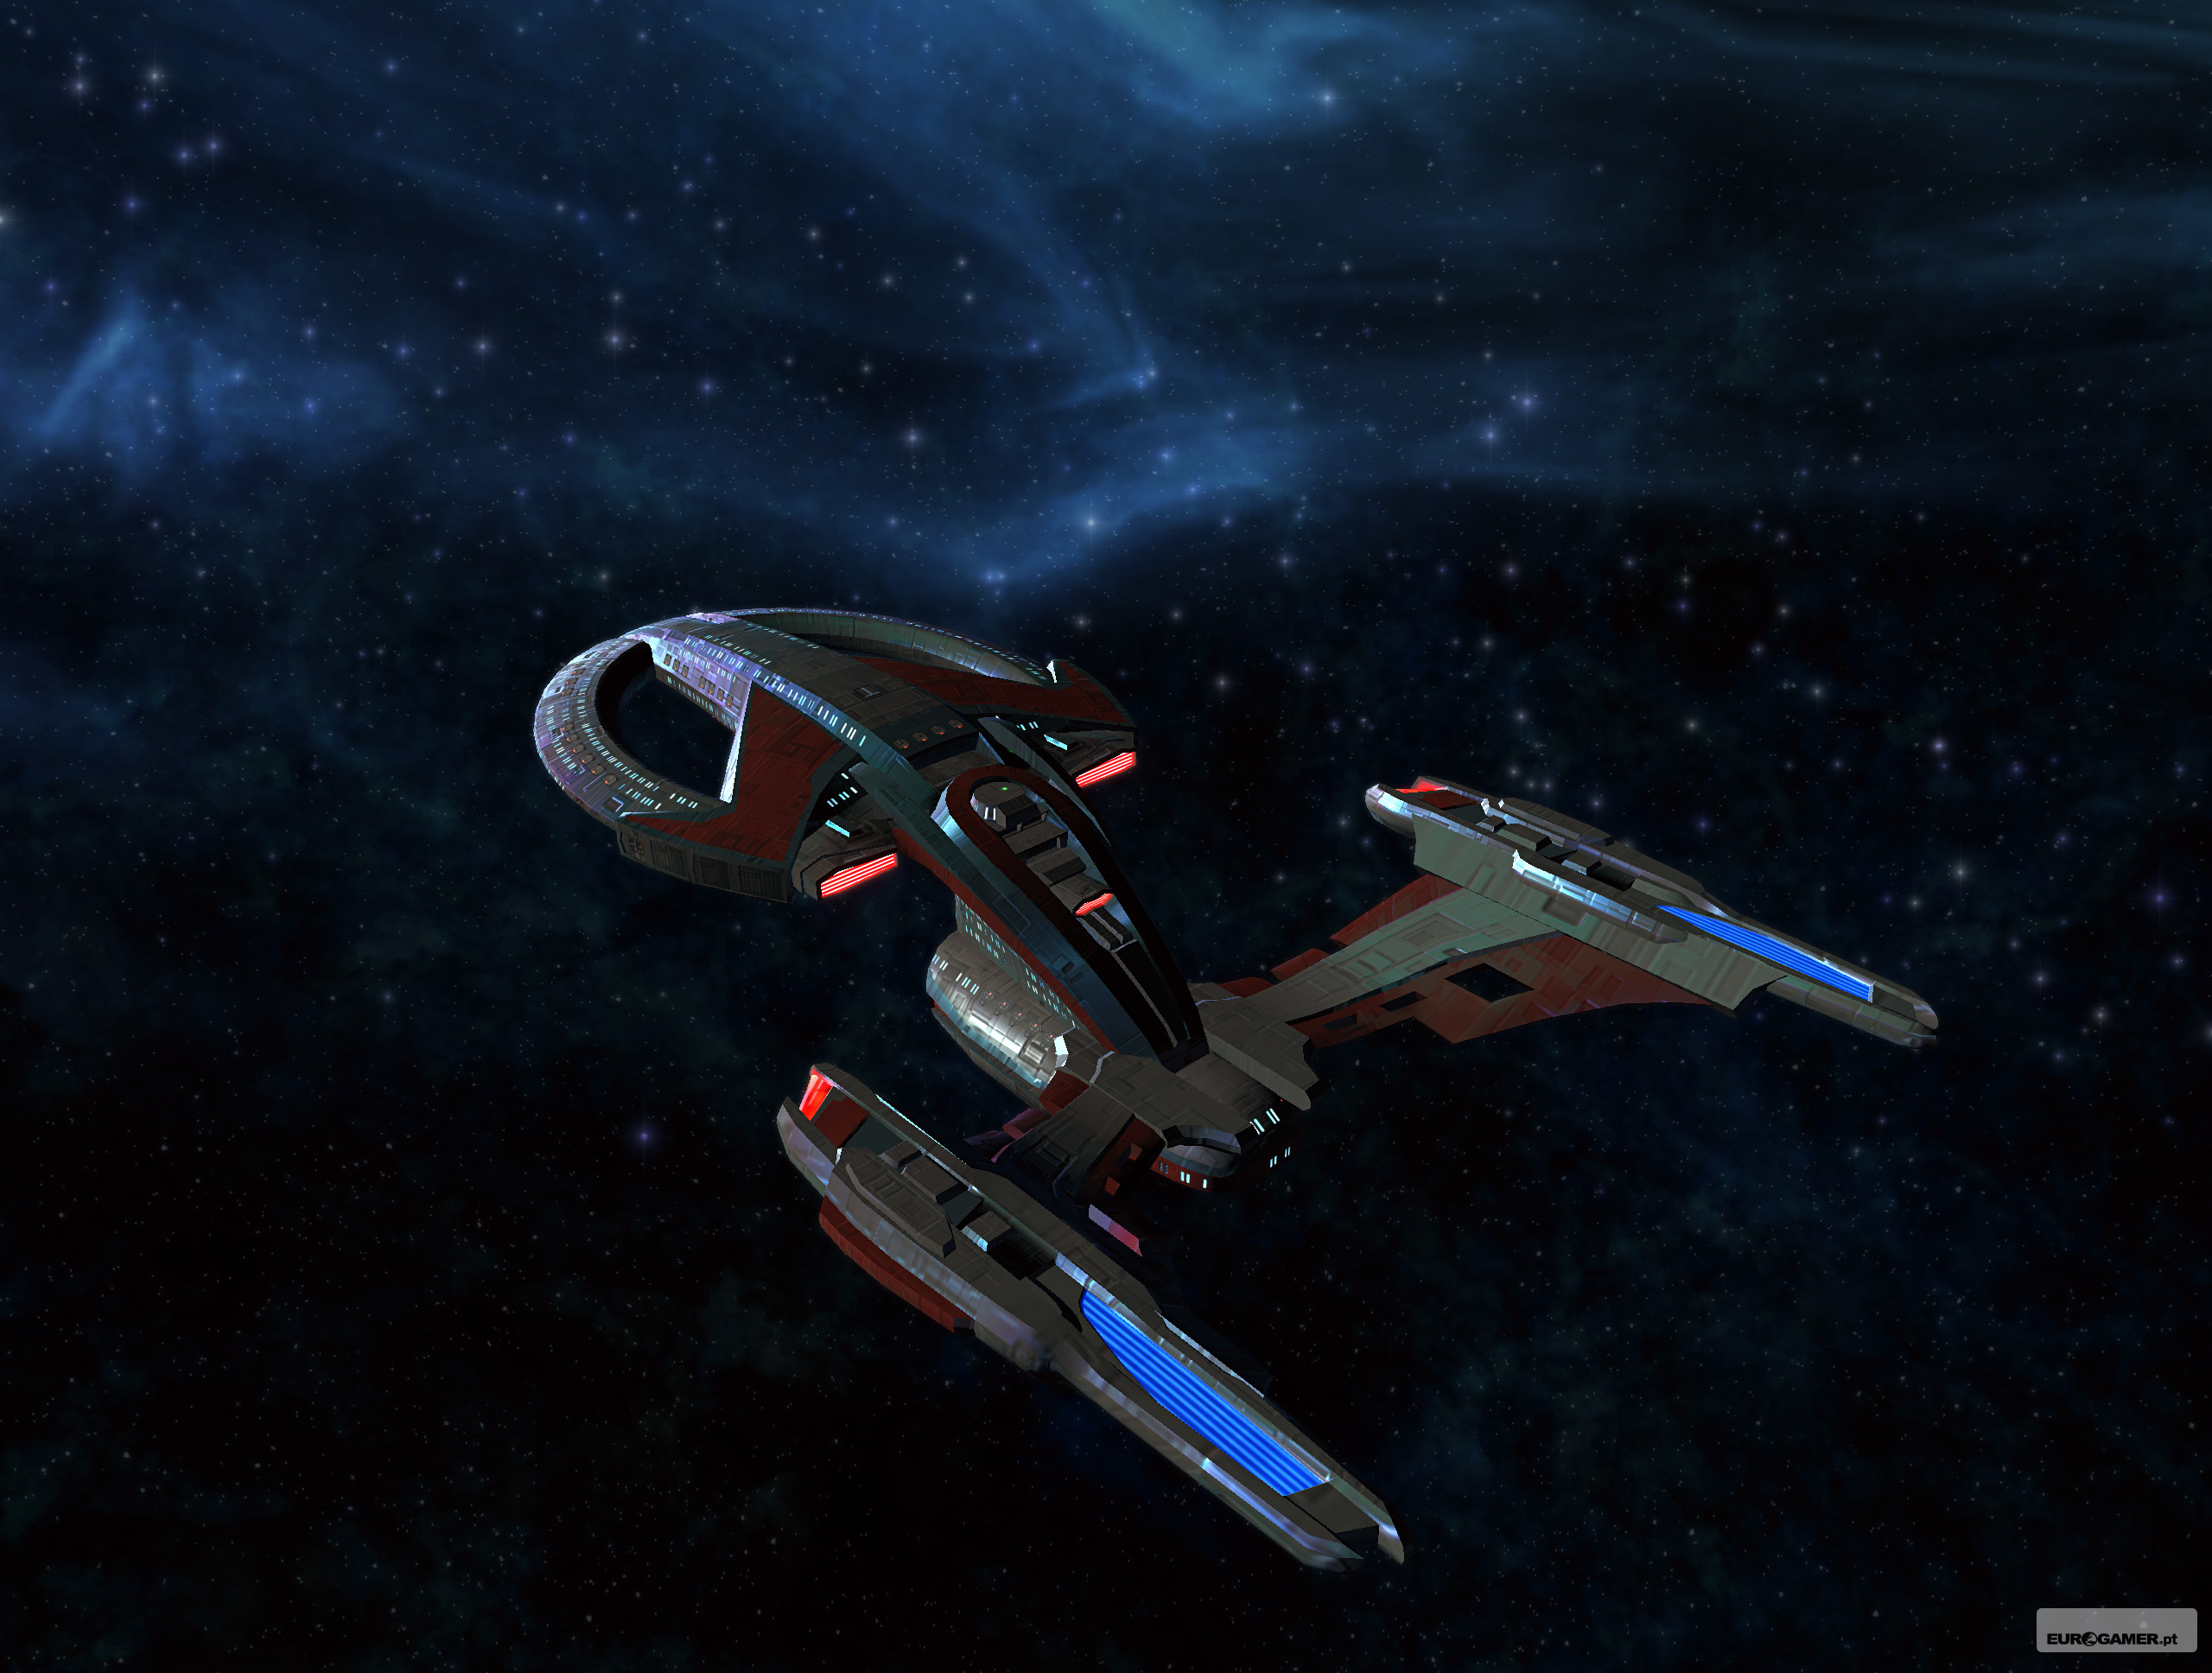 This star trek online wallpaper is available in 24 sizes